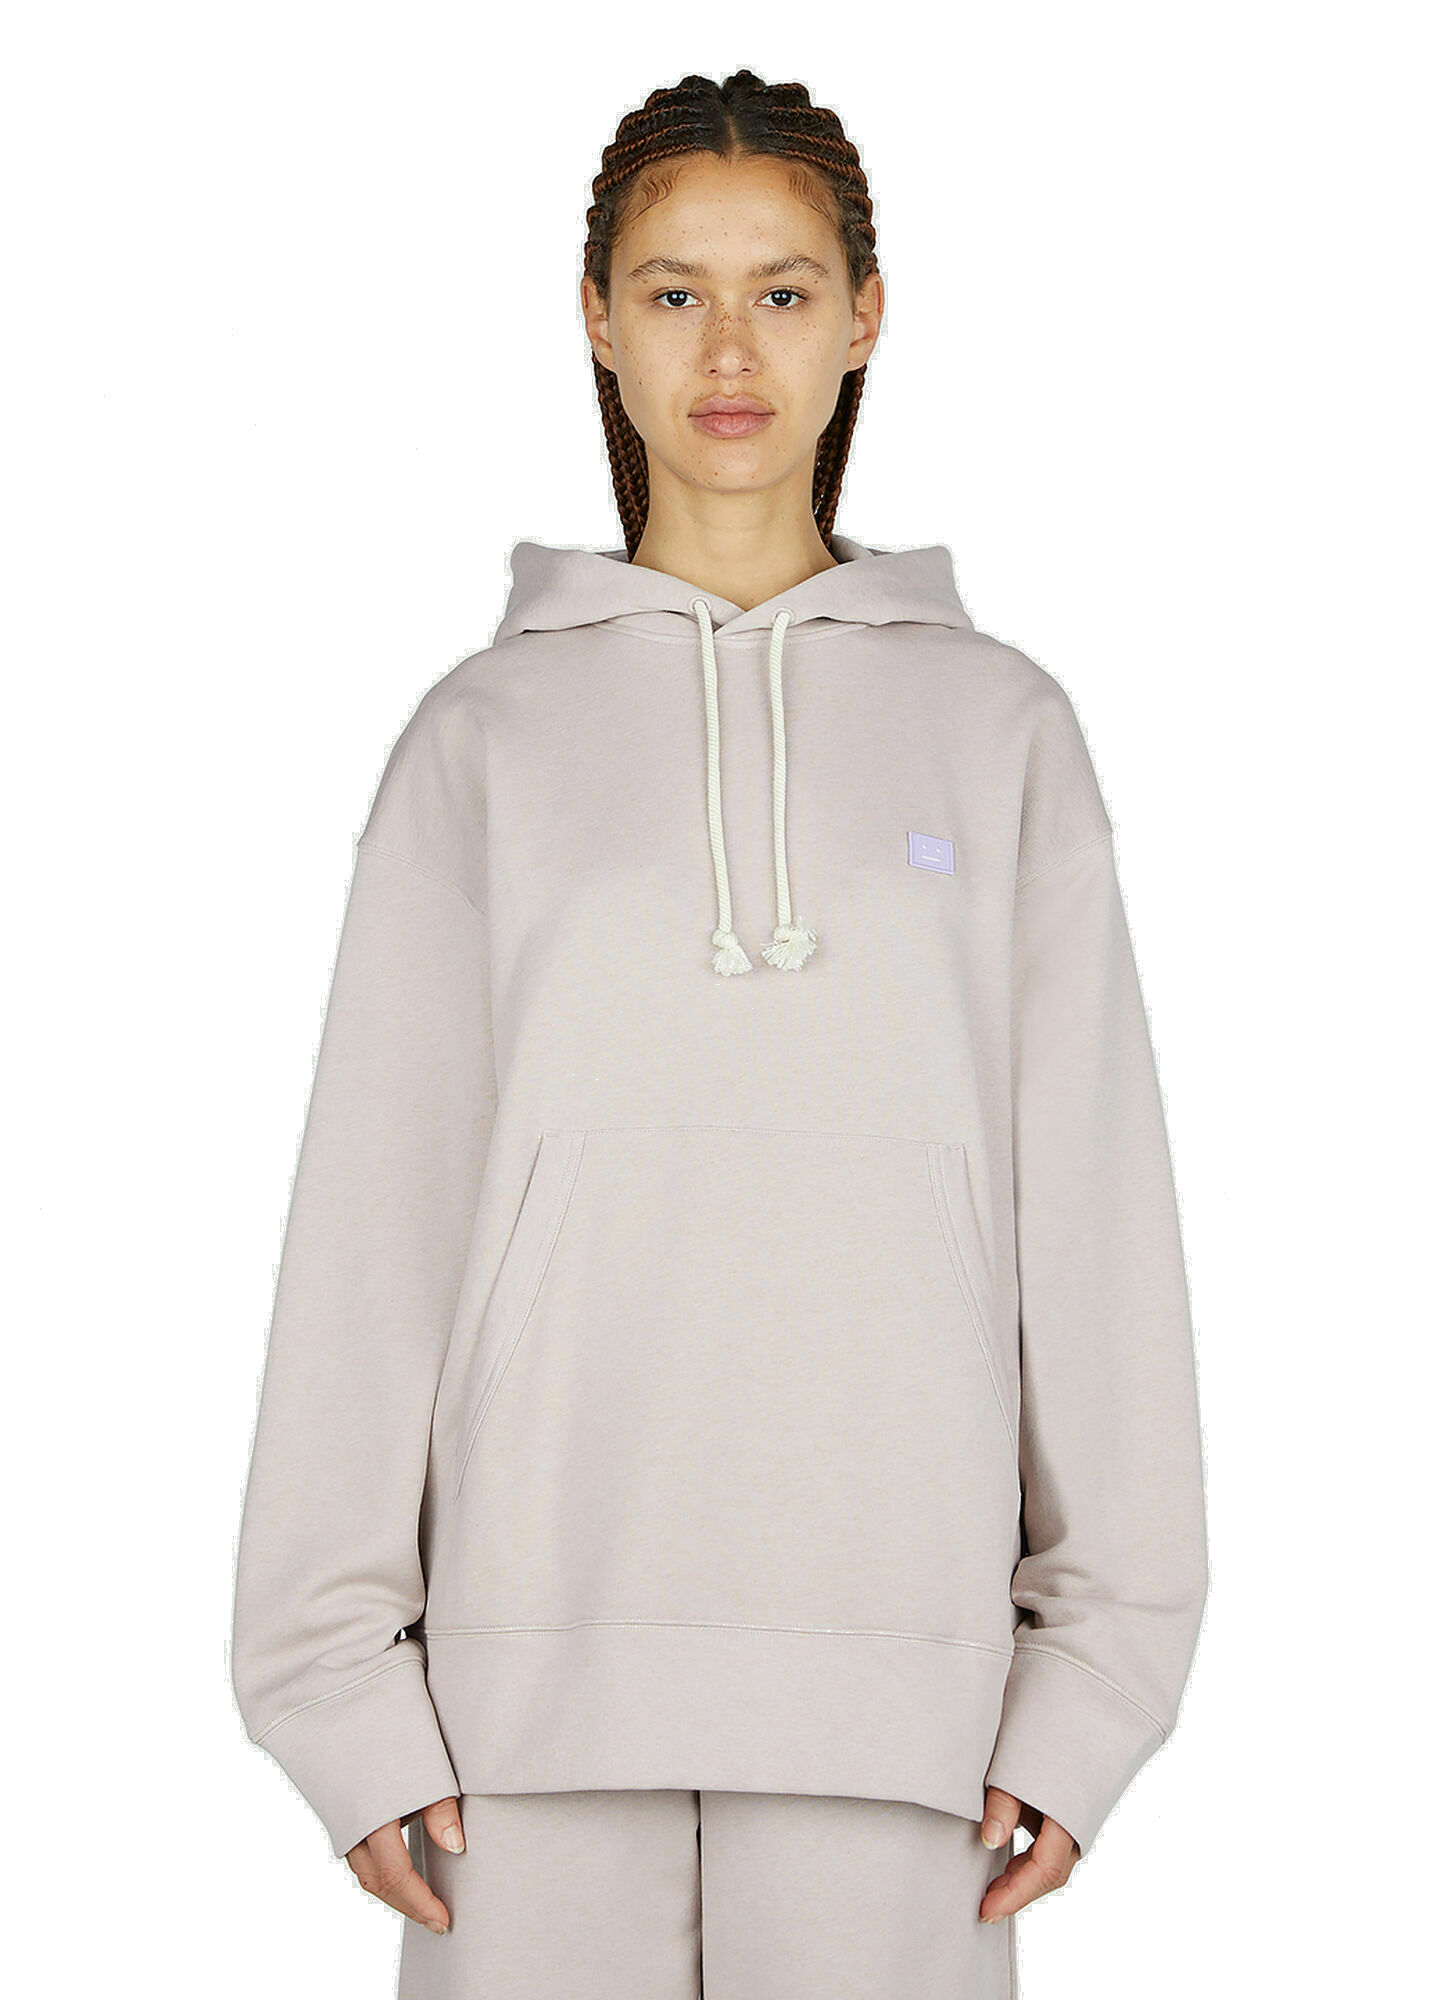 Acne Studios - Face Patch Hooded Sweatshirt in Lilac Acne Studios